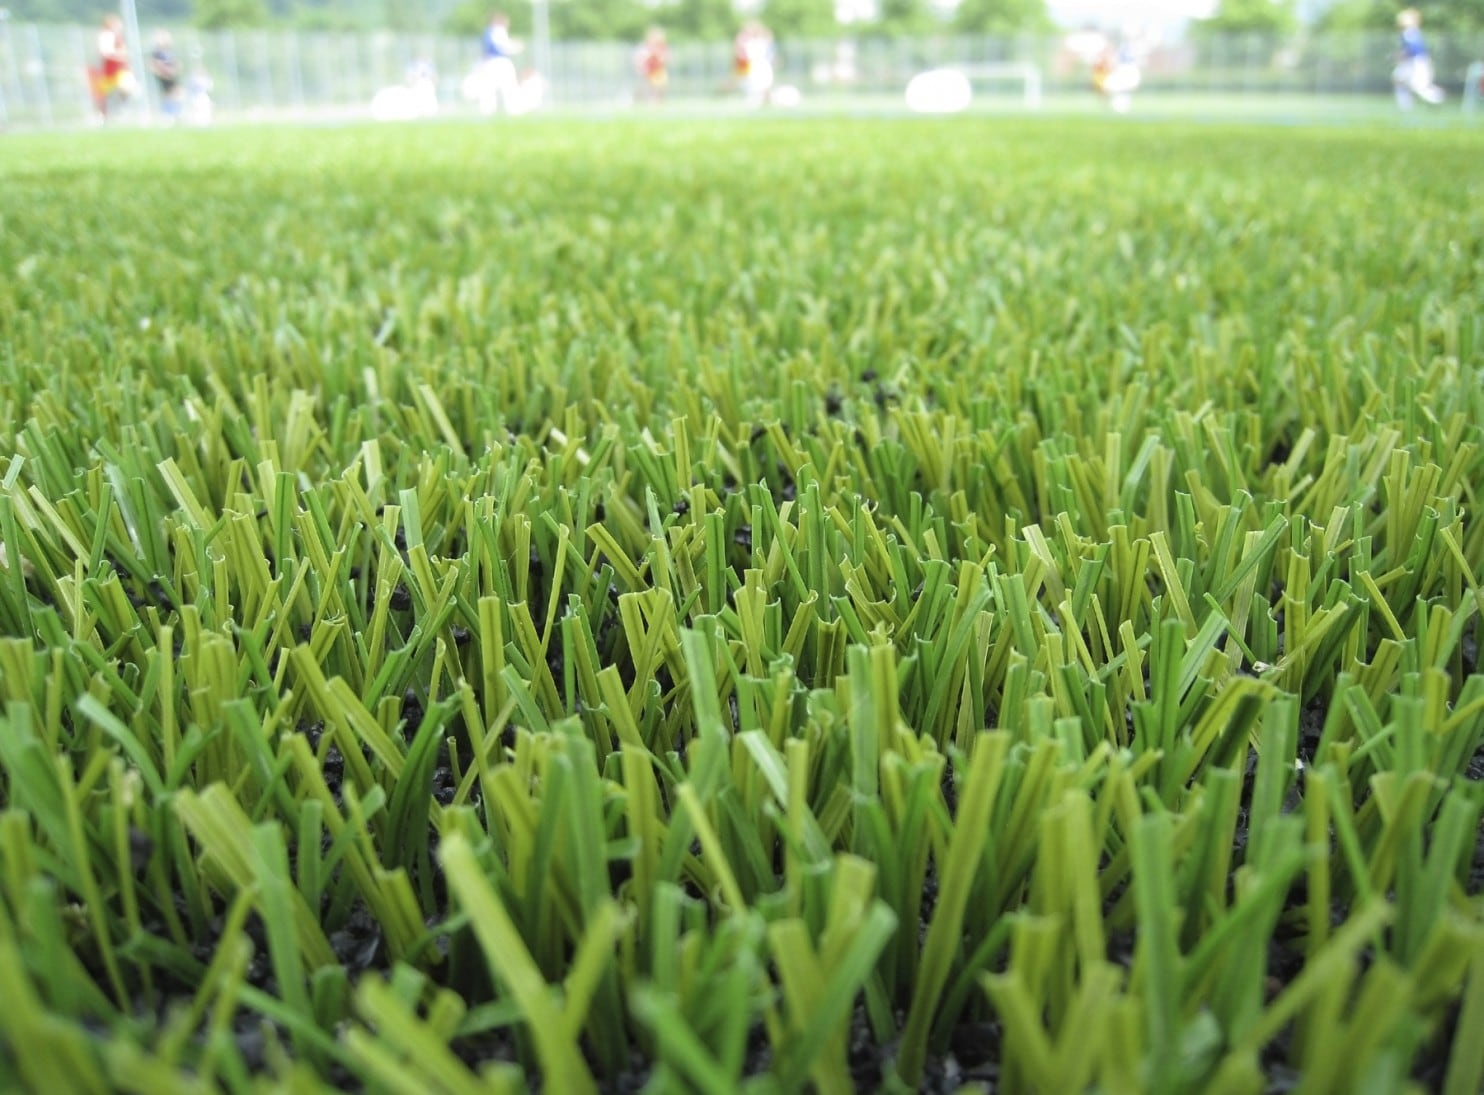 Does playing on artificial turf pose a health risk for your child?